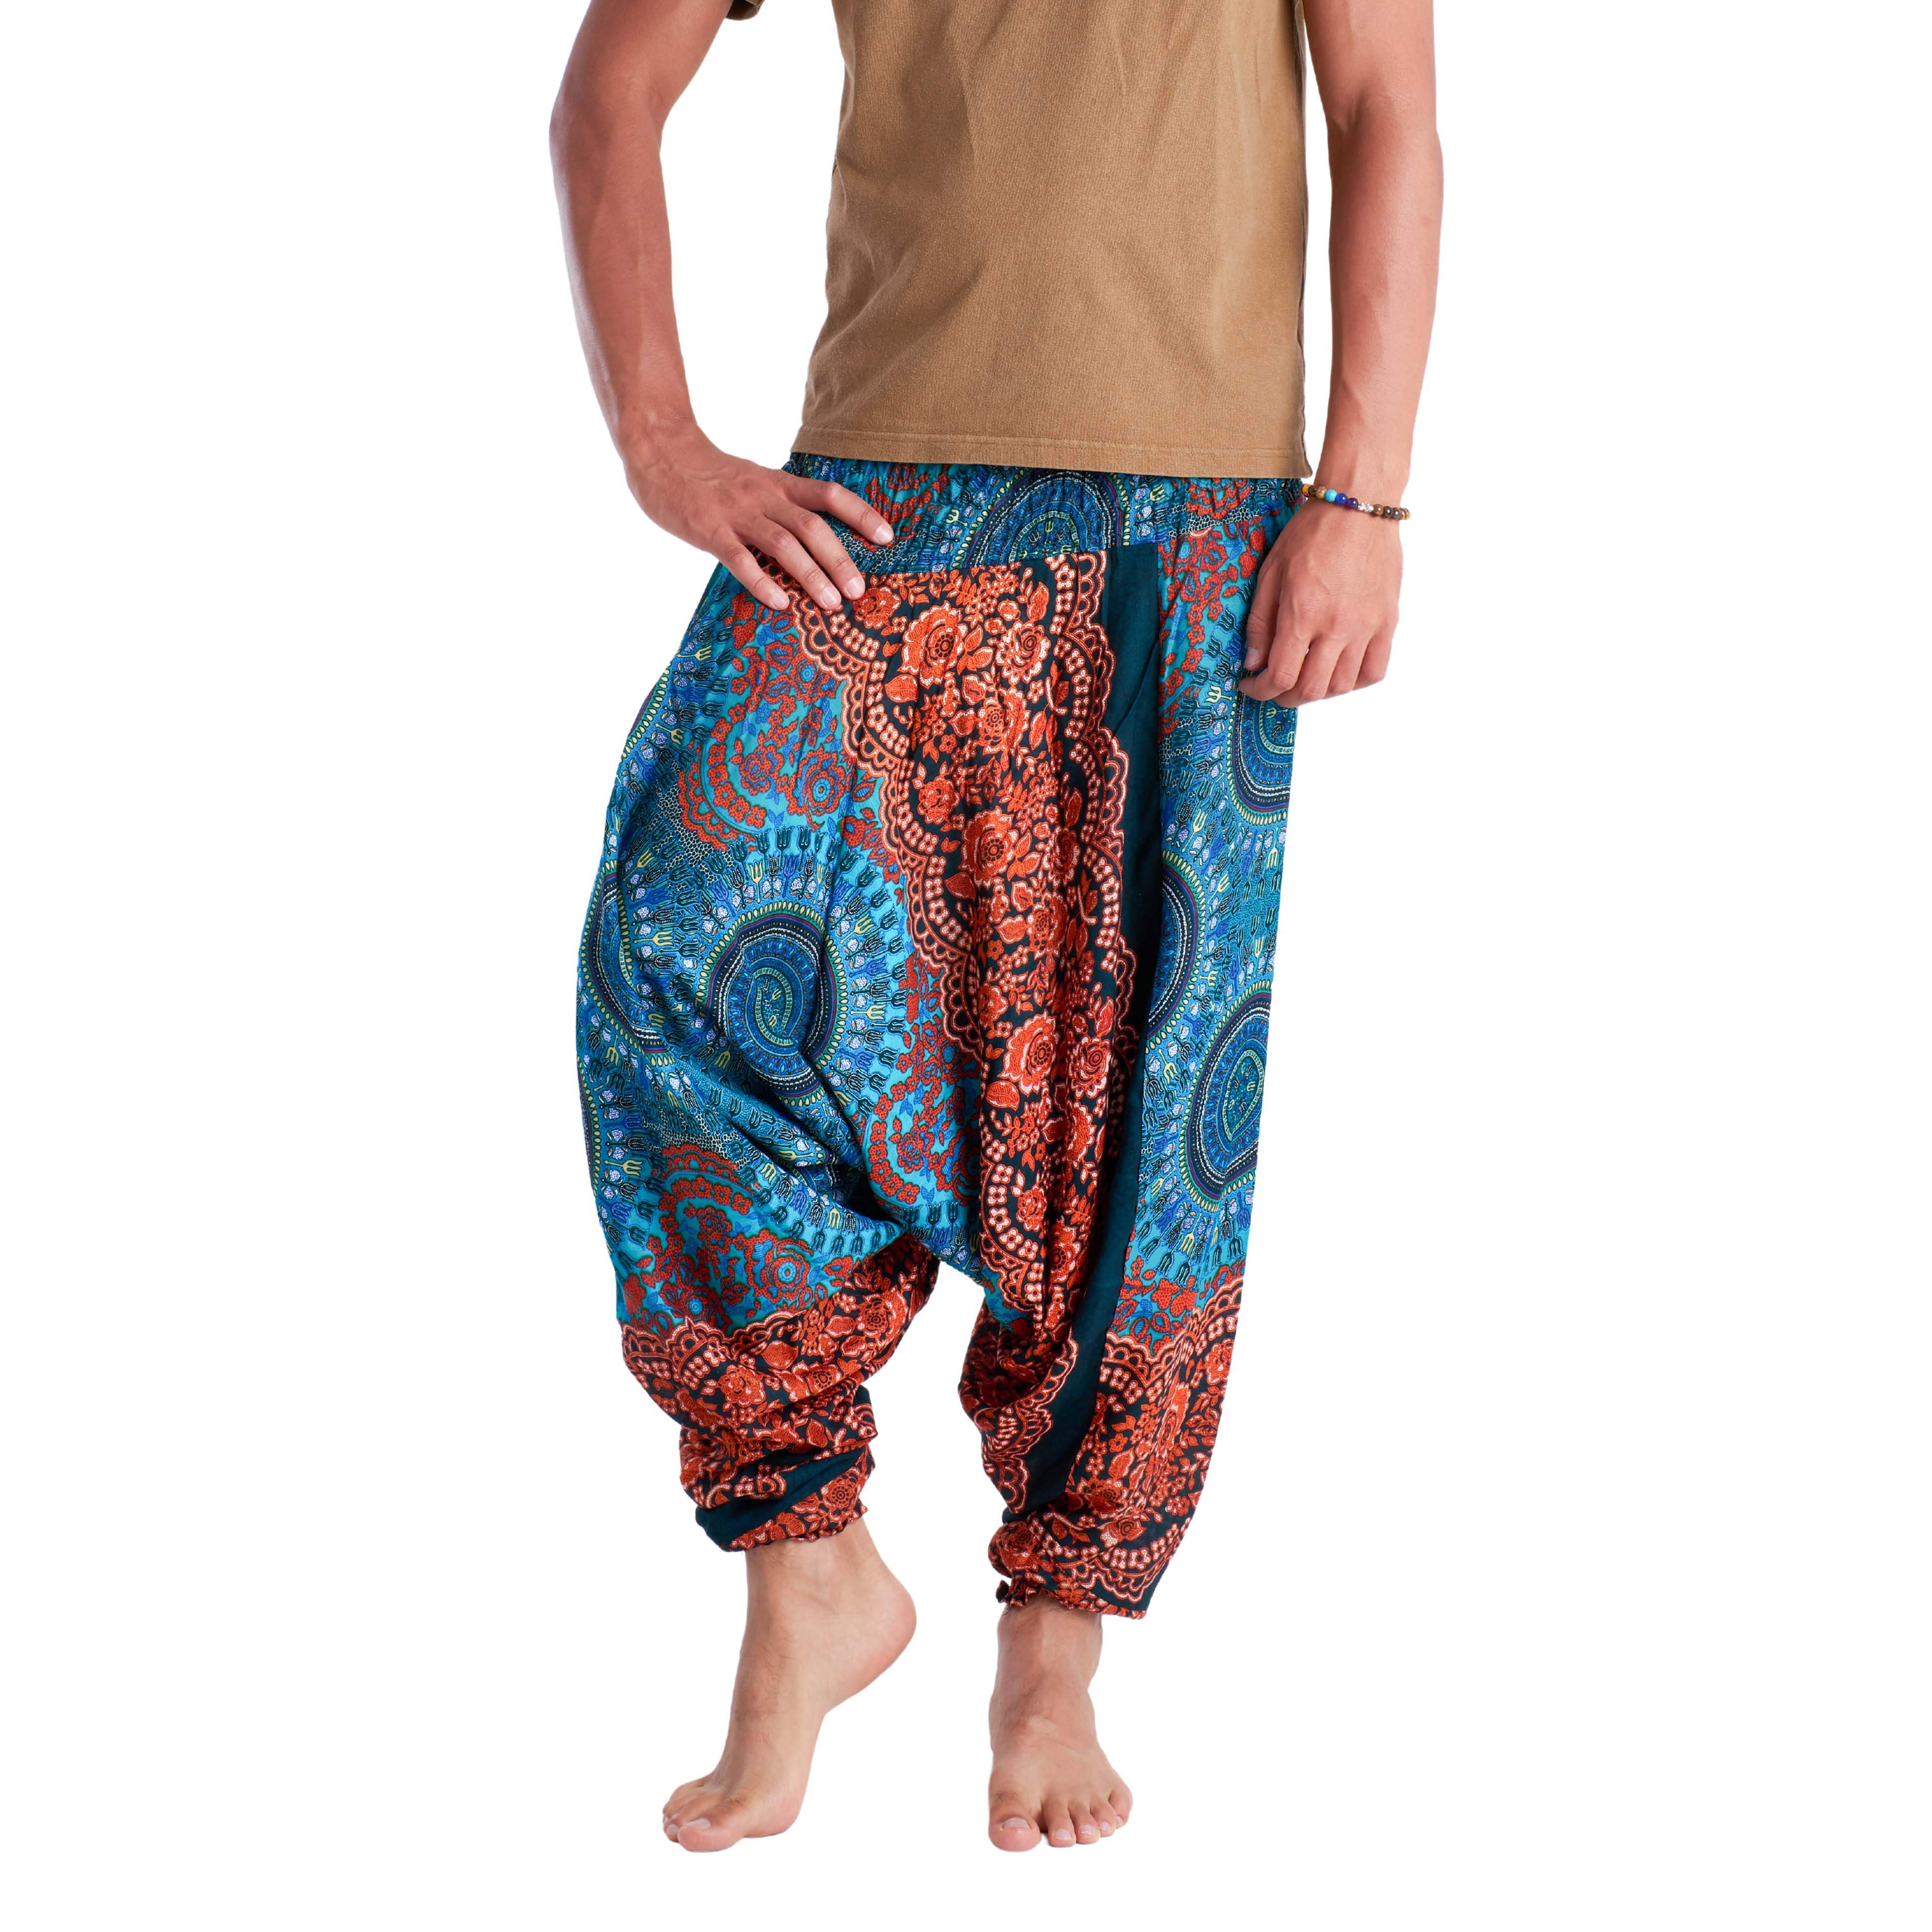 Drawstring - Buy Today Elephant Pants Jewelry And Bohemian Clothes Handmade In Thailand Help To Save The Elephants FairTrade And Vegan